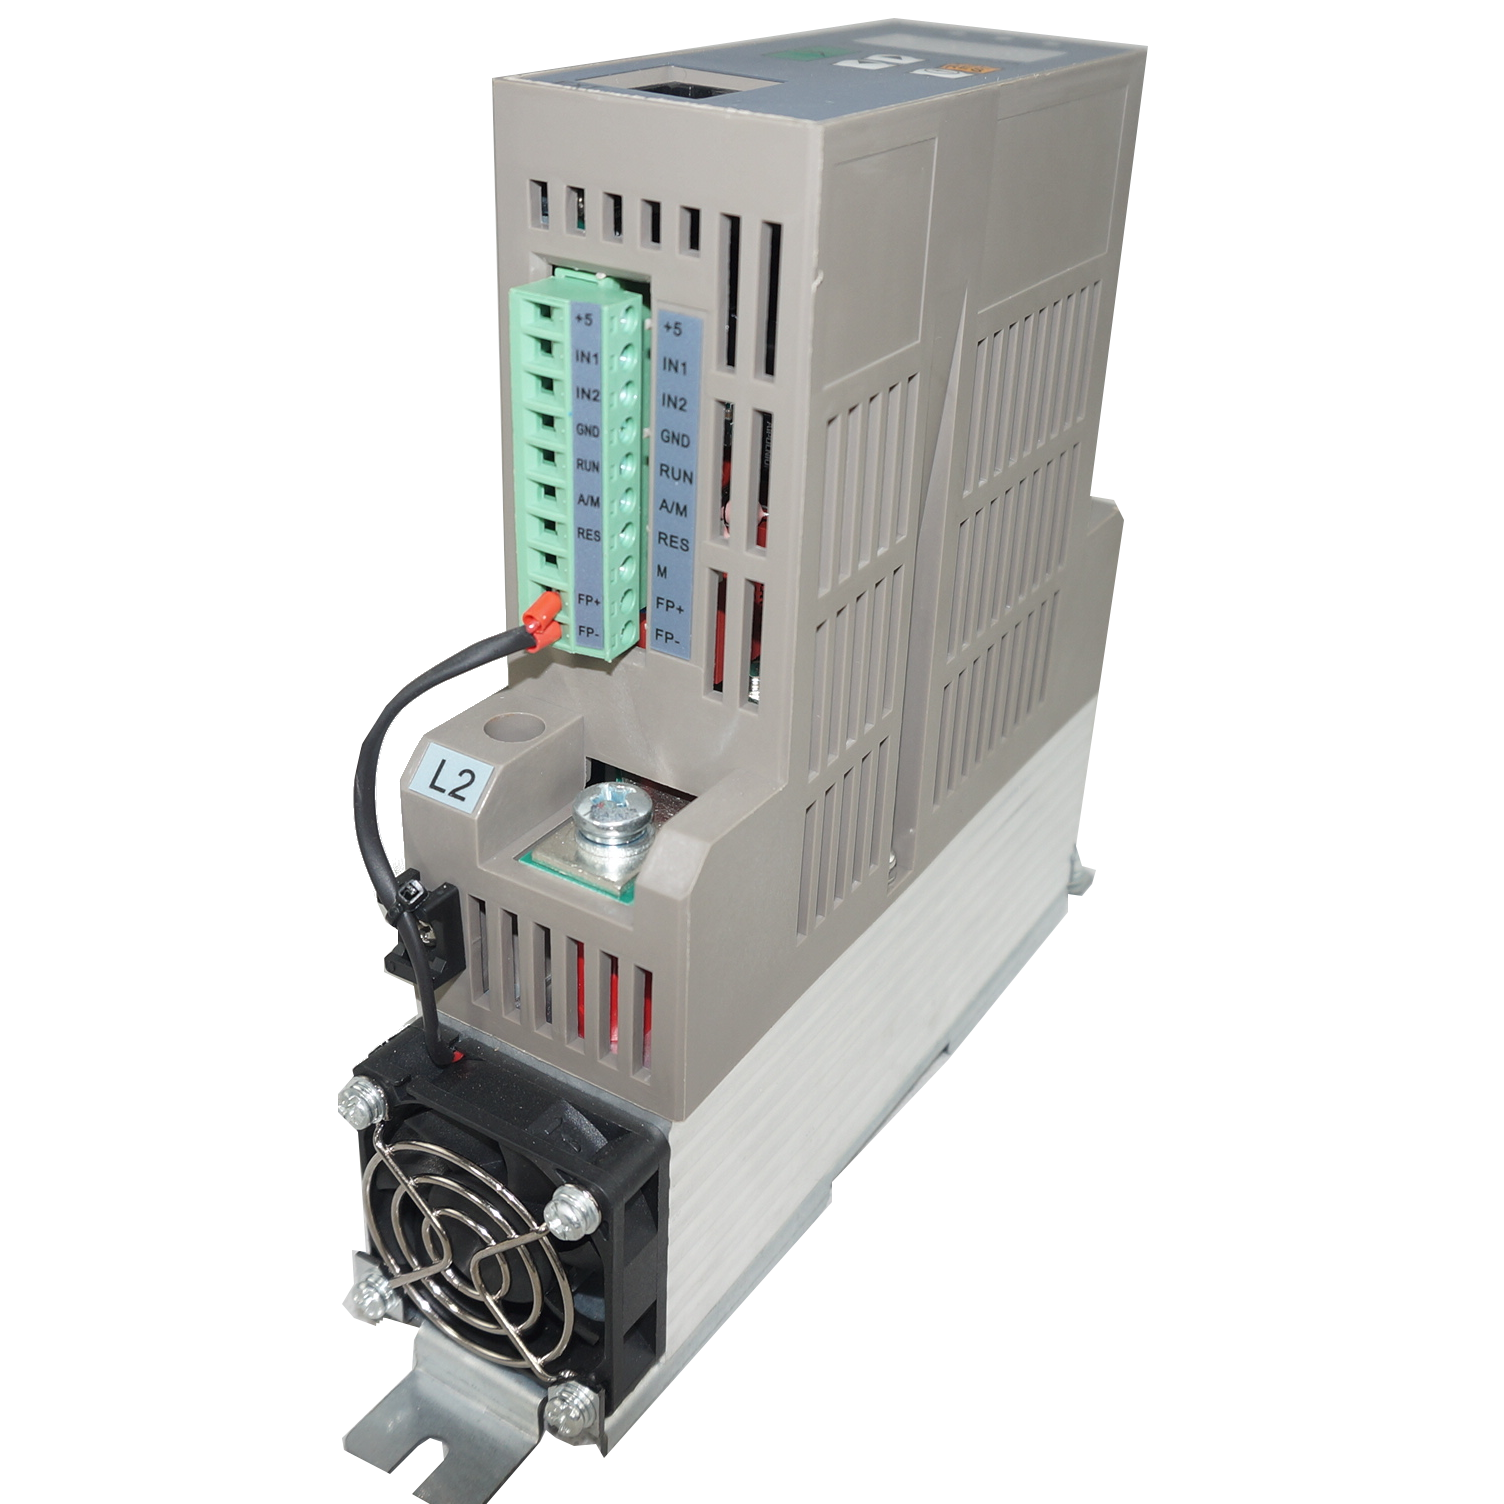 FTM1-A200-V4-W0, Single Phase, Phase Angle/Burst Controller for Primary Control of Transformer (Phase Angle mode only), Voltage/Current/Power Limit Modes, For Single Phase Loads, 400VAC, 160 Amps @ 50 Deg C